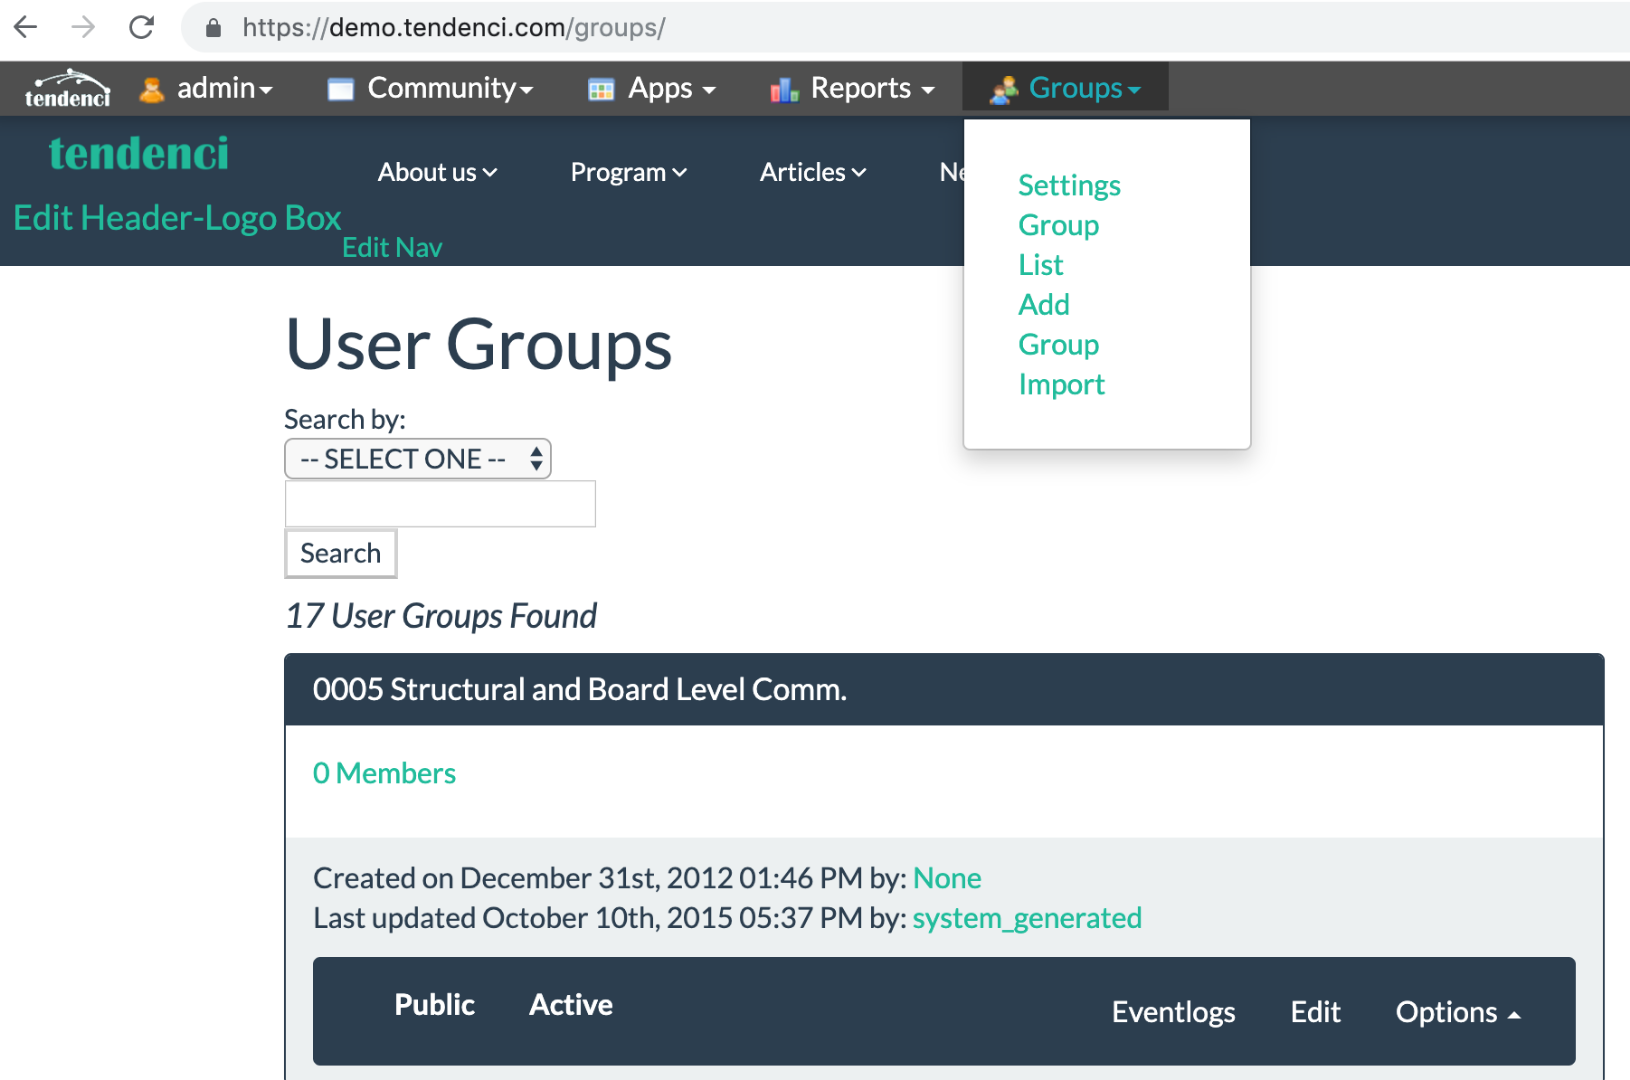 Add a New User Group in Tendenci